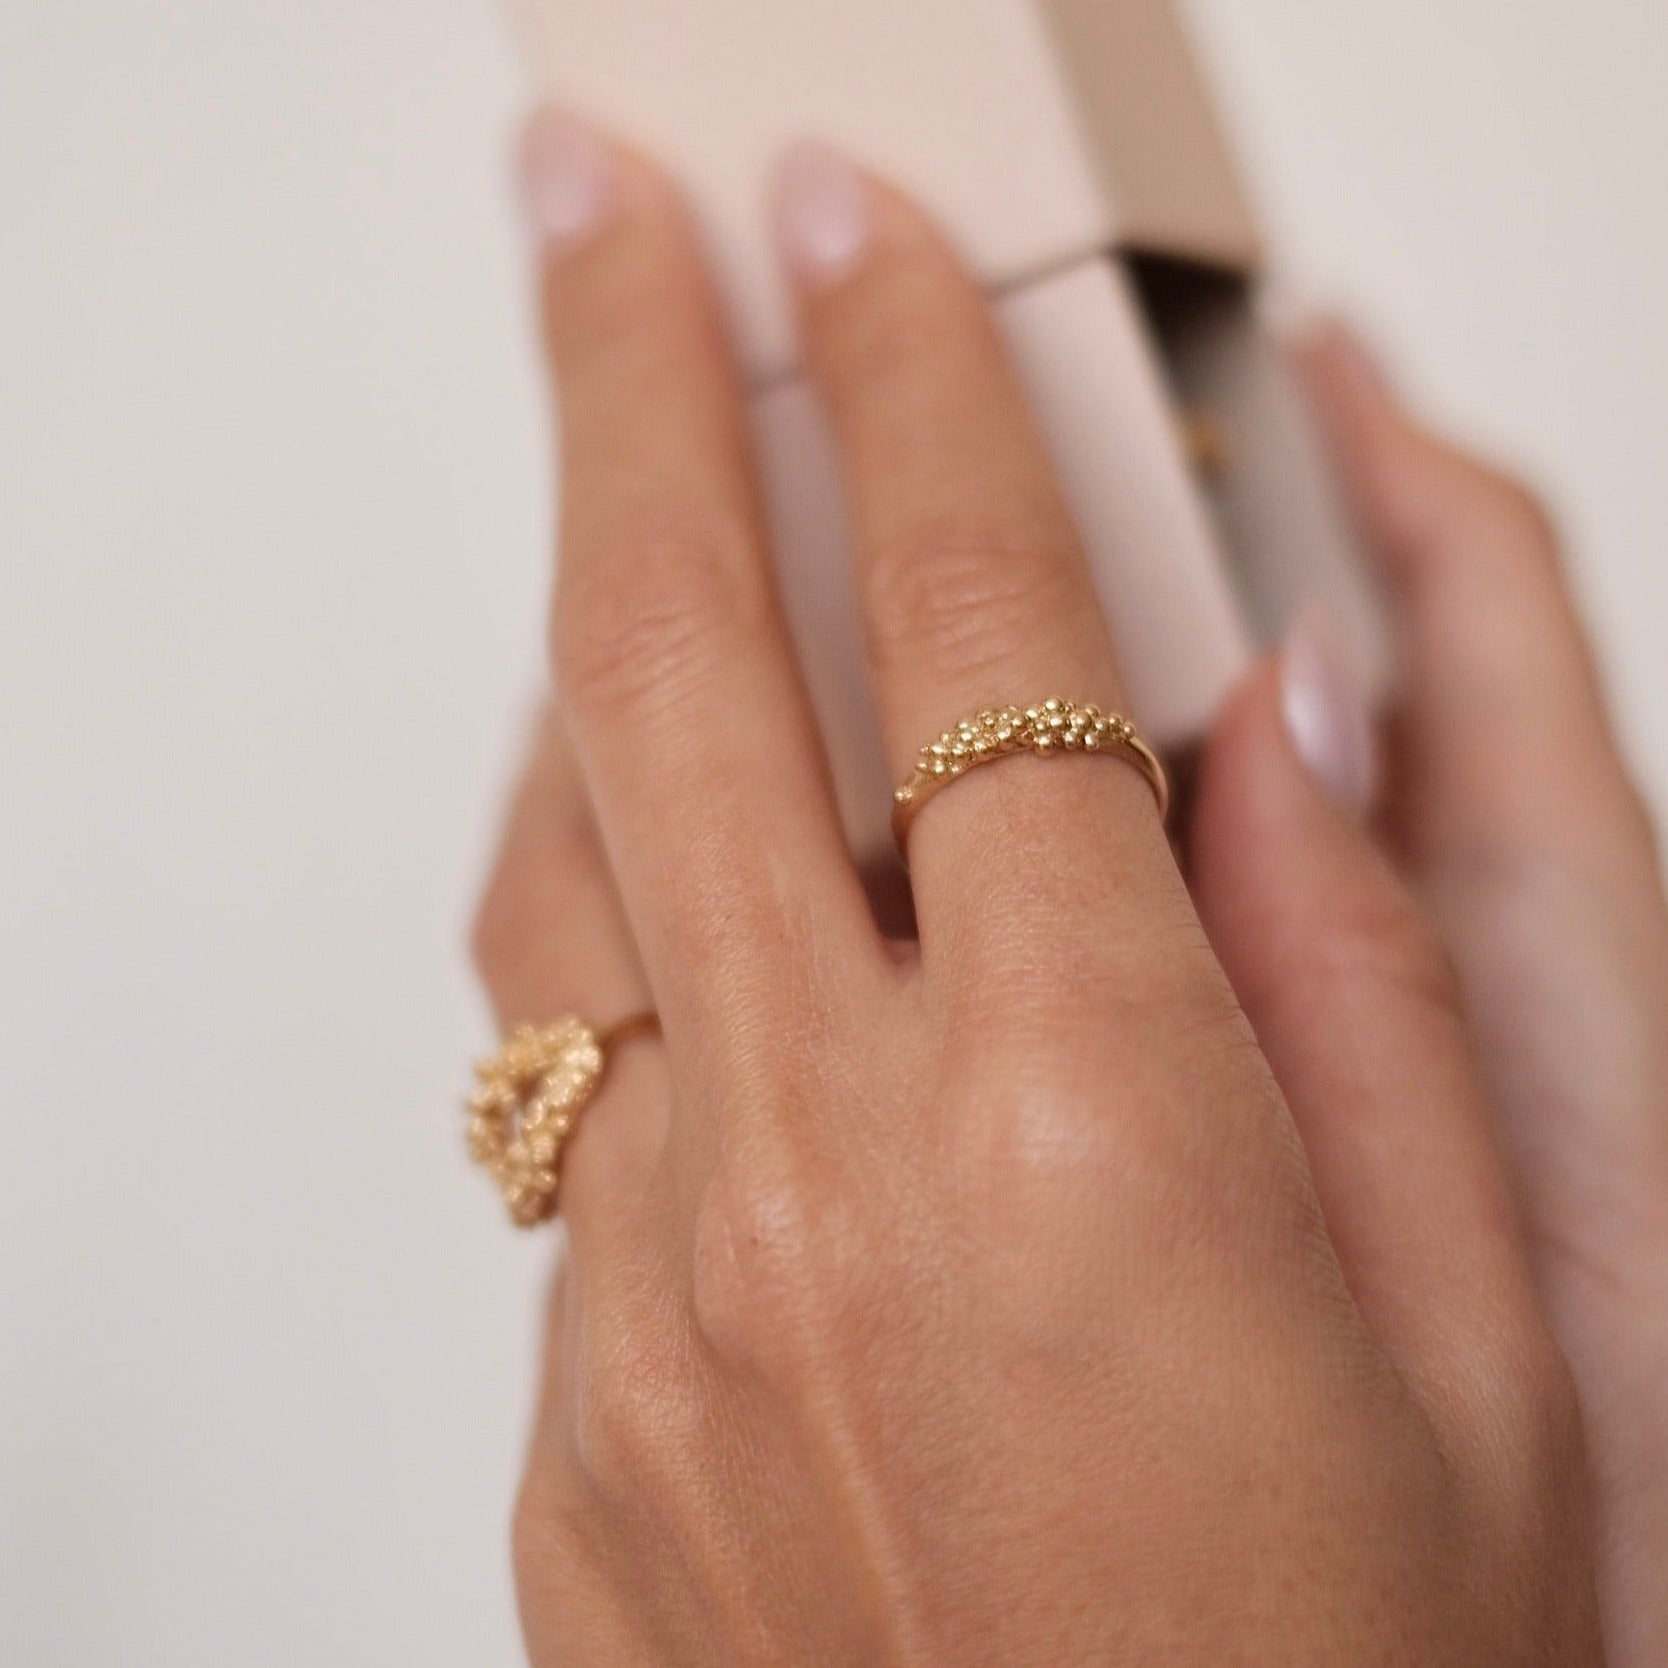 A woman's hand showcasing an exquisite Cremilde Bispo Jewellery Essential Dot Ring crafted with 18K Yellow Gold.